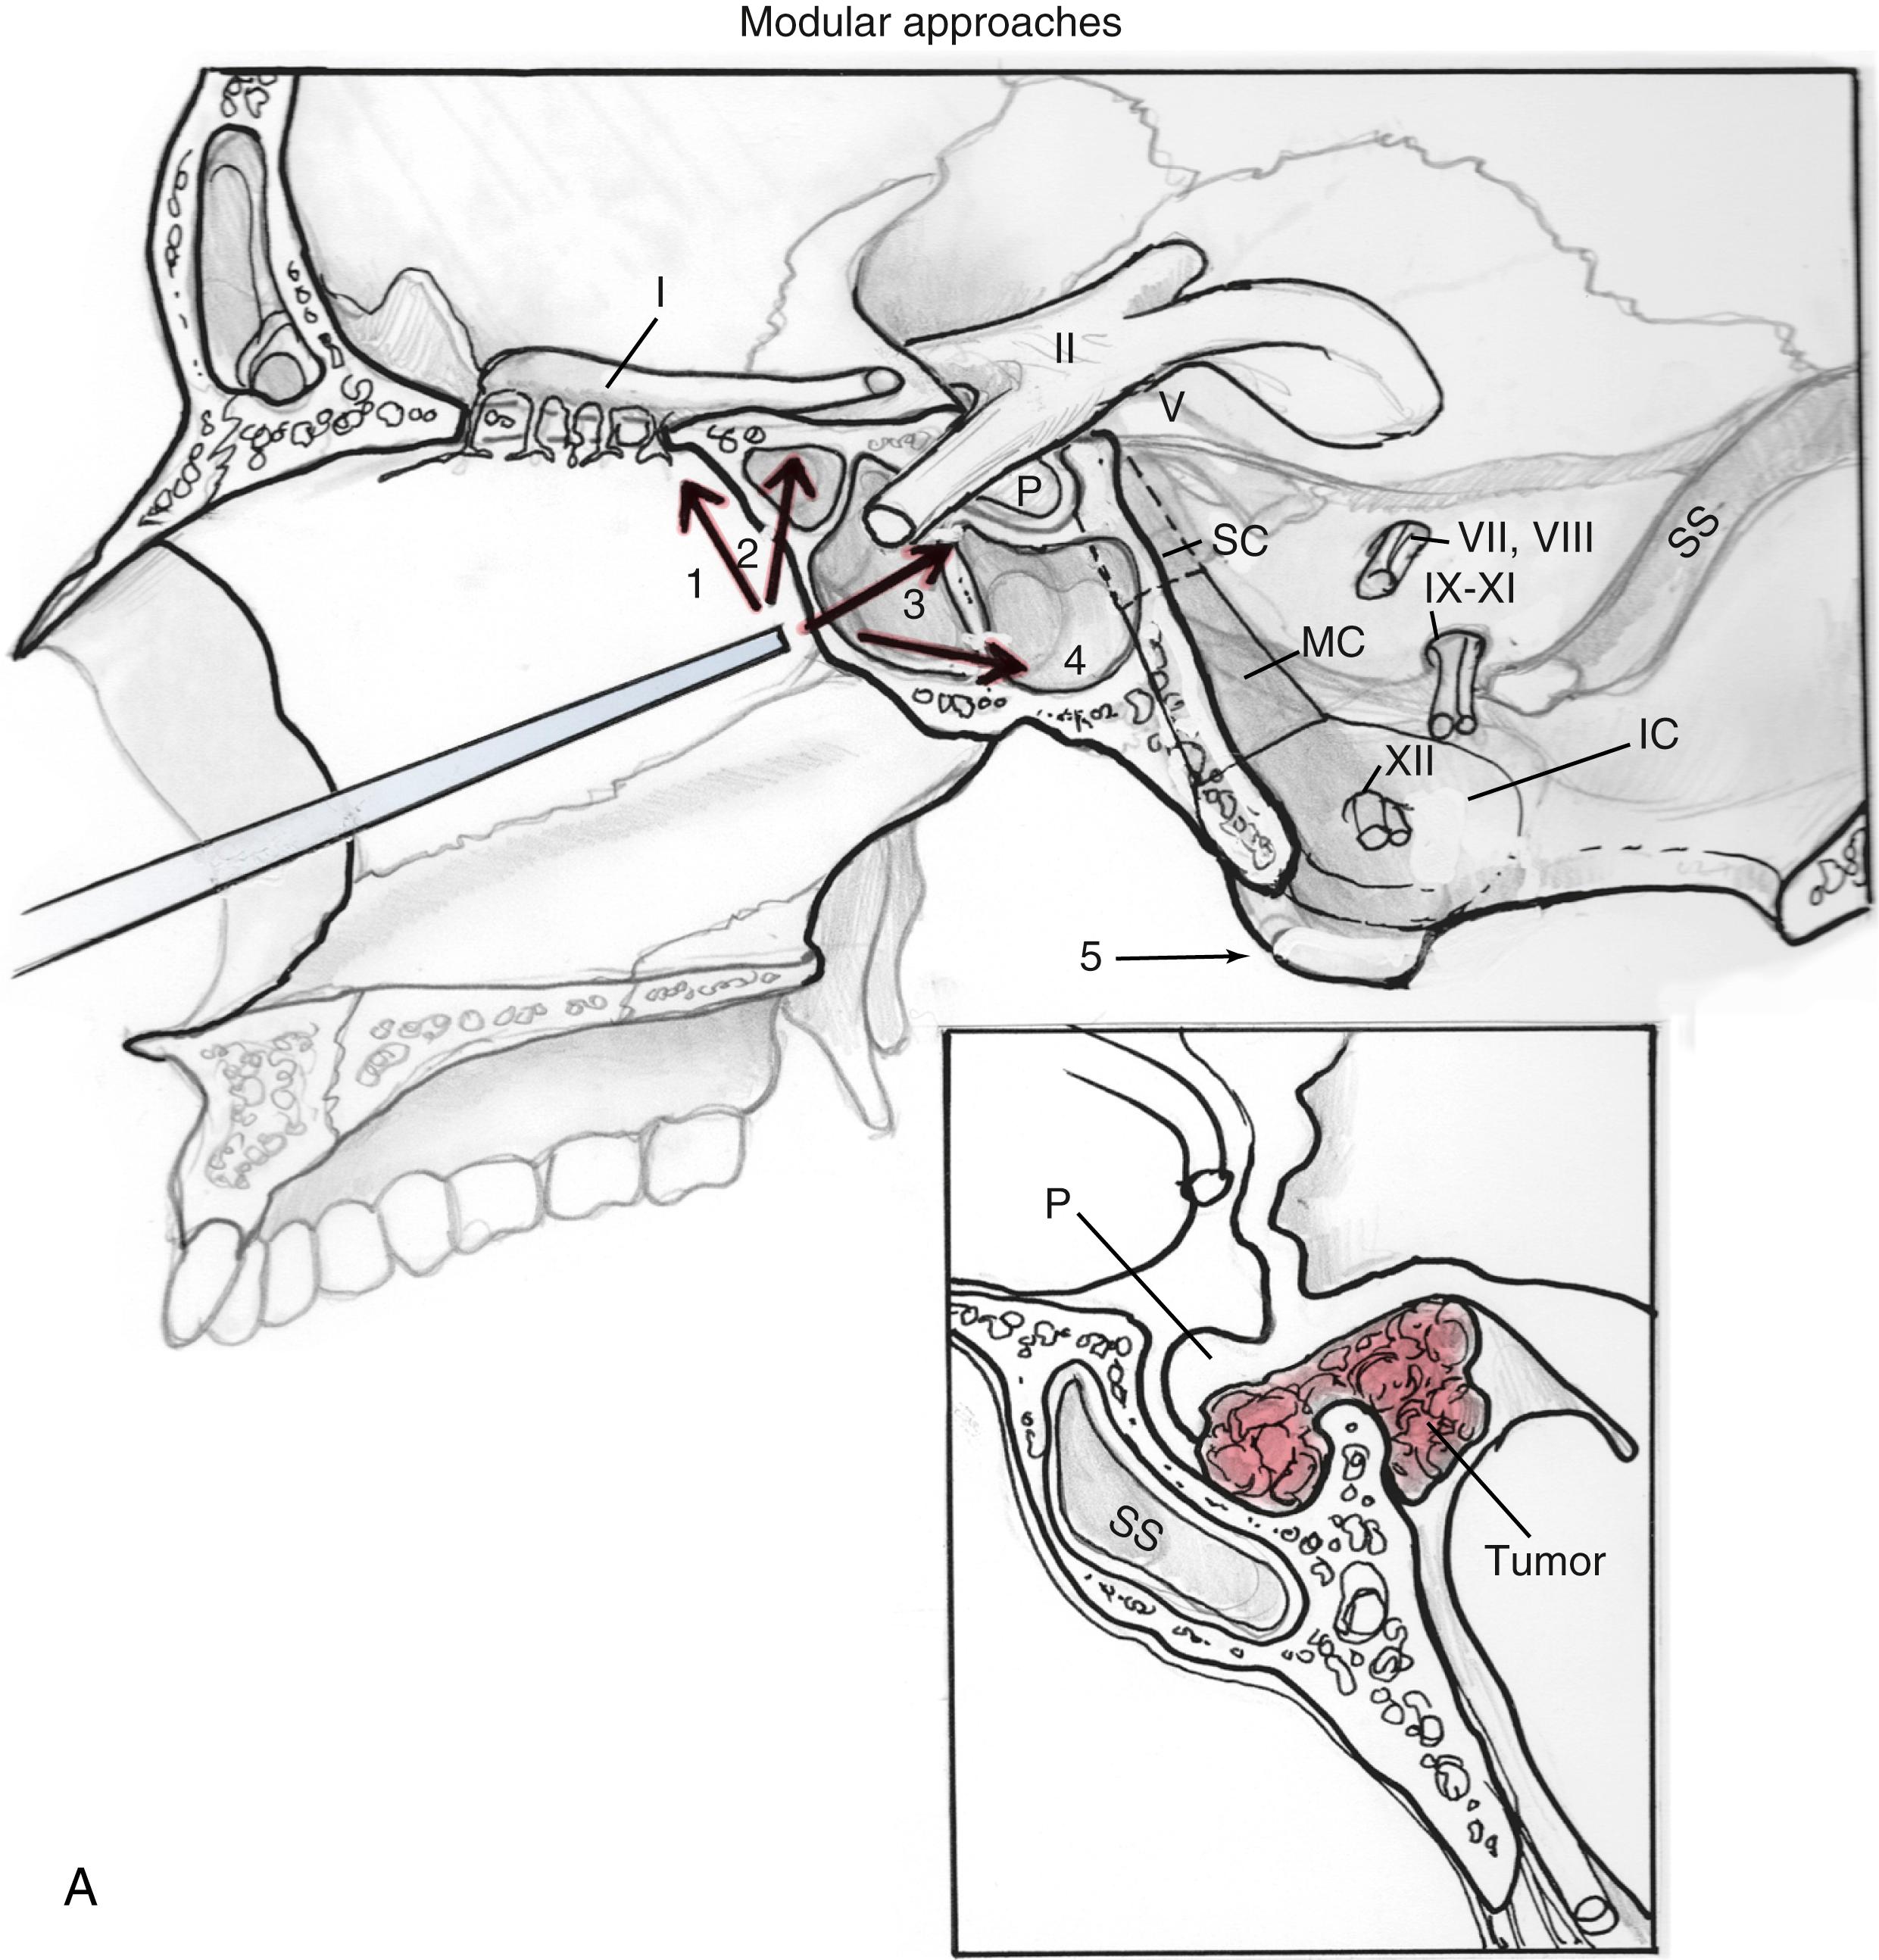 Fig. 50.1, (A) The lateral view of the sagittal plane modular expanded endonasal approaches as shown in a rostral-caudal axis. 1, Transcribriform; 2, transplanum; 3, transsellar; 4, transclival: superior, middle, inferior; 5, transodontoid. IC , inferior; MC , middle; SC , superior; P, pituitary; SS, sigmoid sinus. (B) The view of the anterior skull base from above showing sample tumor locations for the various rostral-caudal modules. Tumor locations: 1, Near cribriform plate (ethmoid); 2, suprasellar near anterior clinoid; 3, optic chiasma, and CN II; 4, pituitary gland; 5, dorsum sellae; 6, post-clinoid process; 7, cavernous sinus; 8, clivus. IC , Inferior; MC , middle; SC , superior; SS , sphenoid sinus.